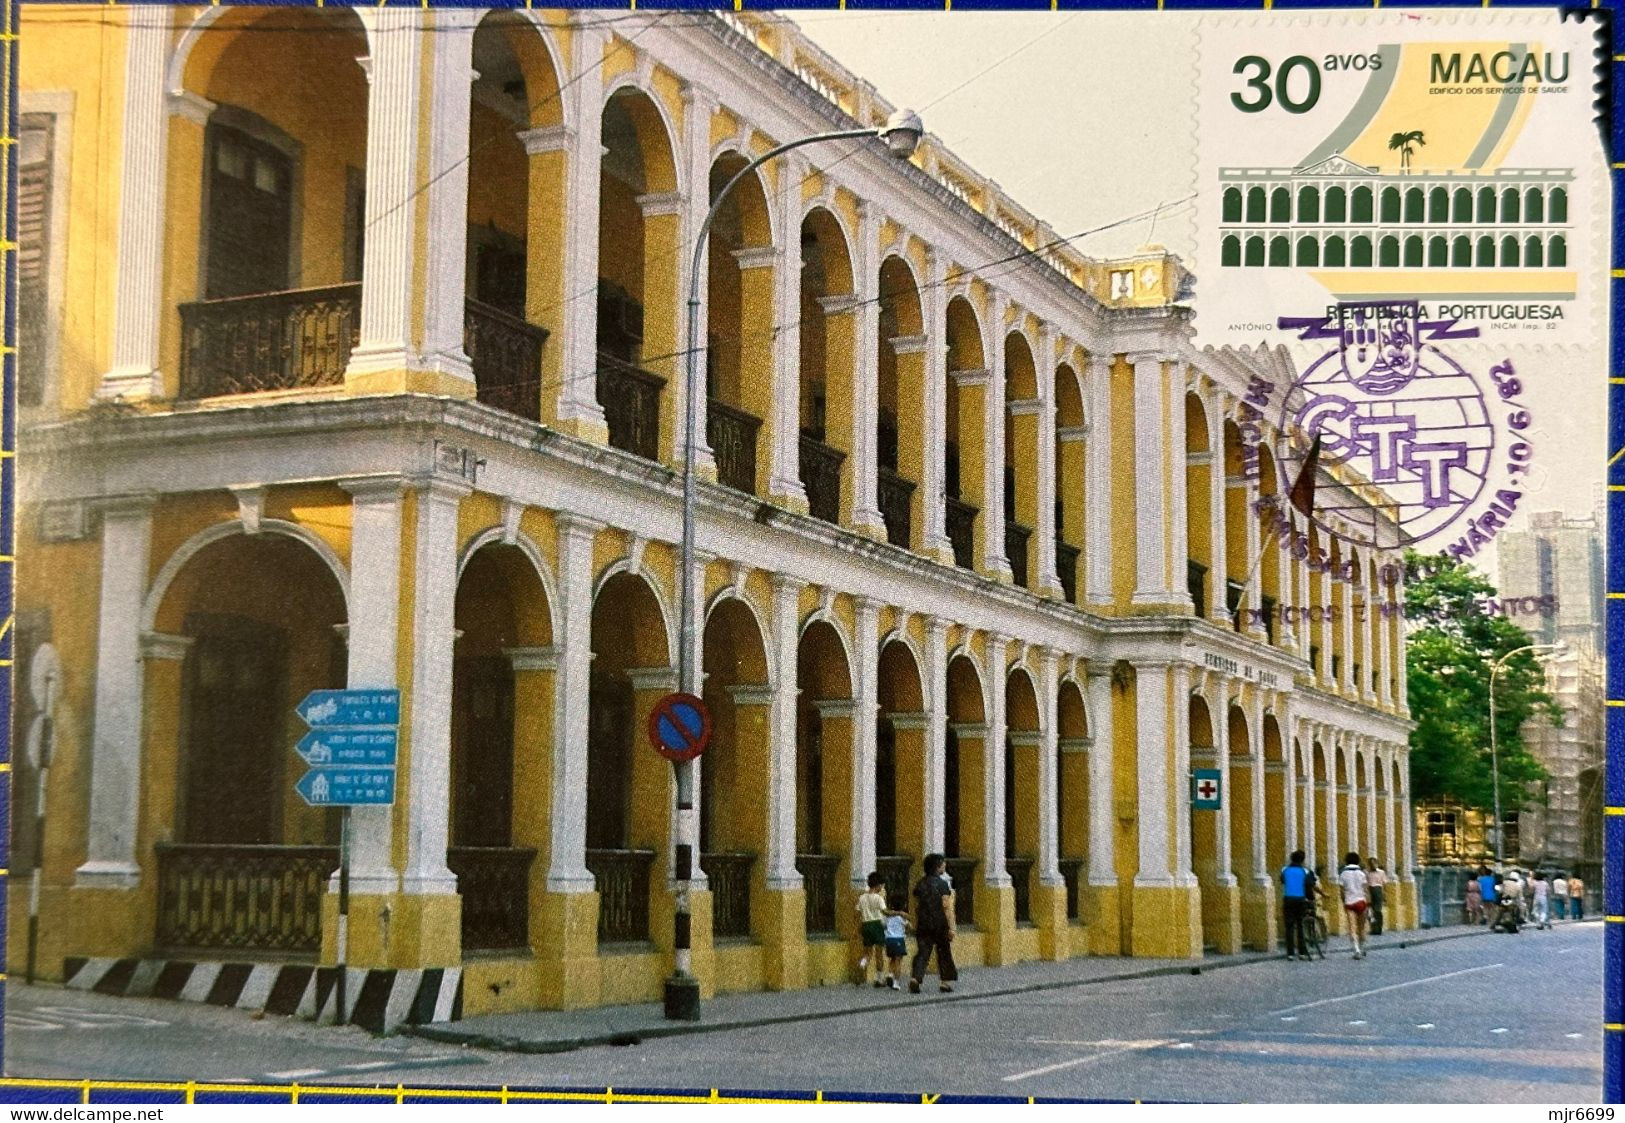 MACAU - 1982 BUILDINGS ISSUE SET OF 5 MAX CARD (CANCEL - FIRST DAY) - Maximum Cards